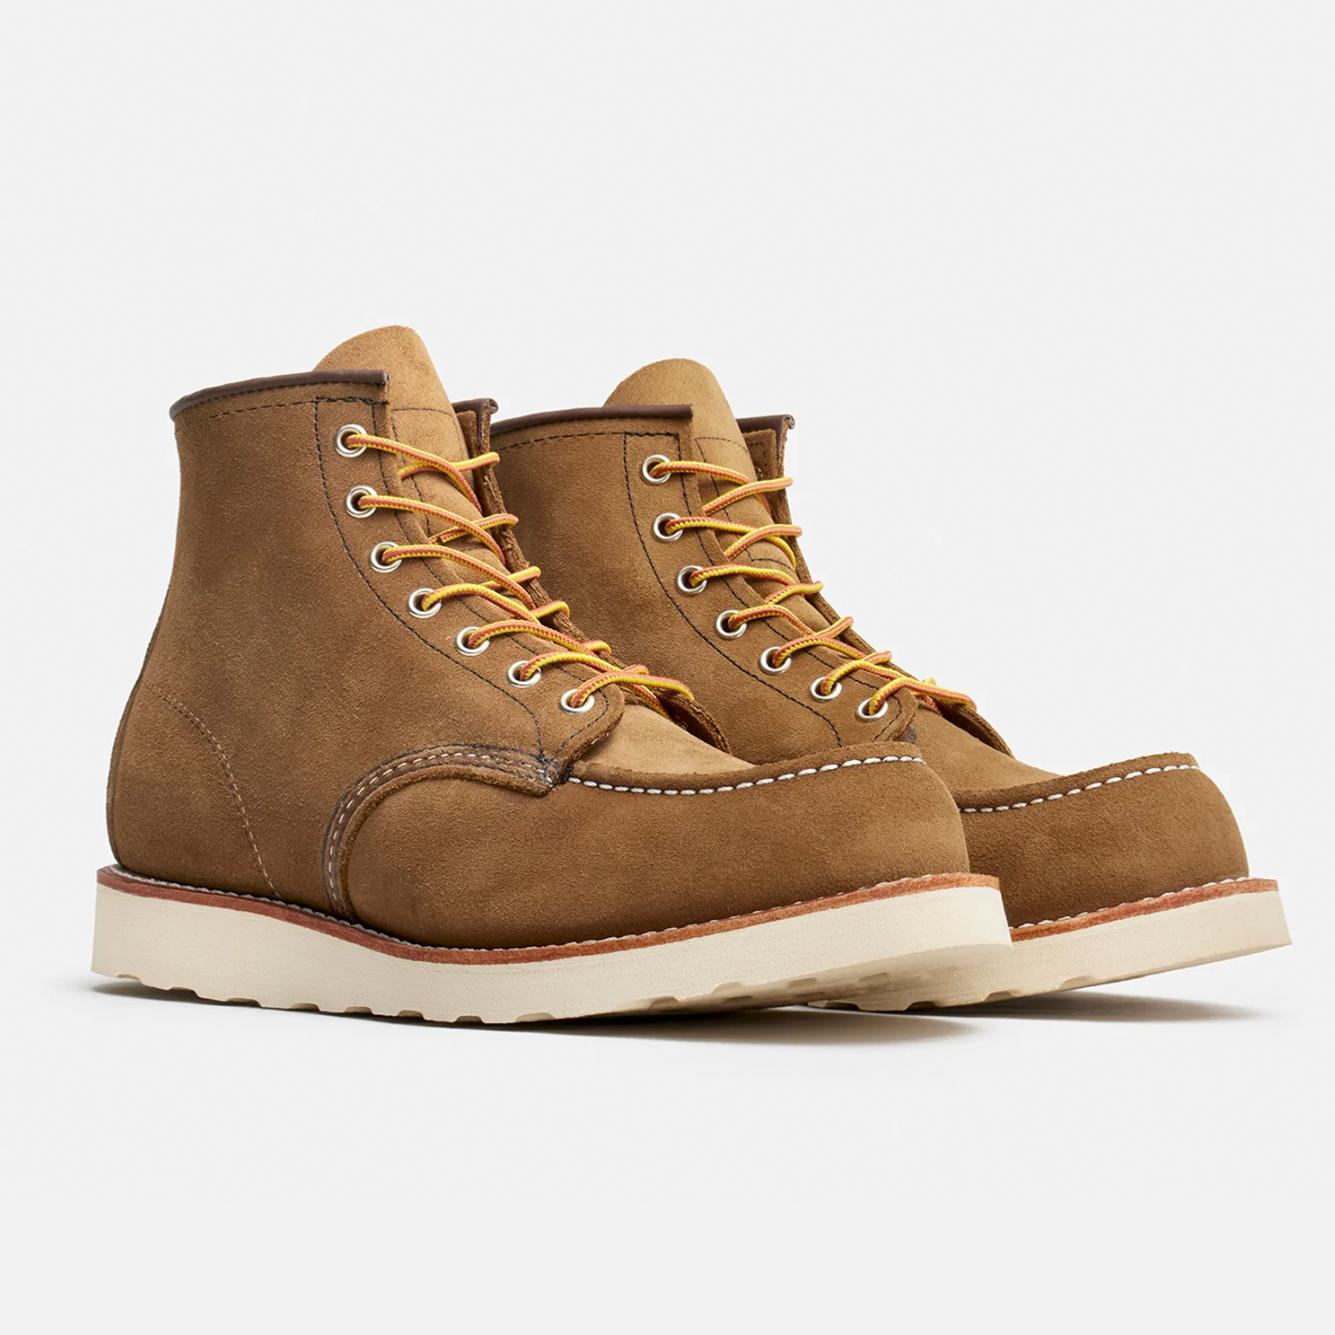 RED WING 8881-6